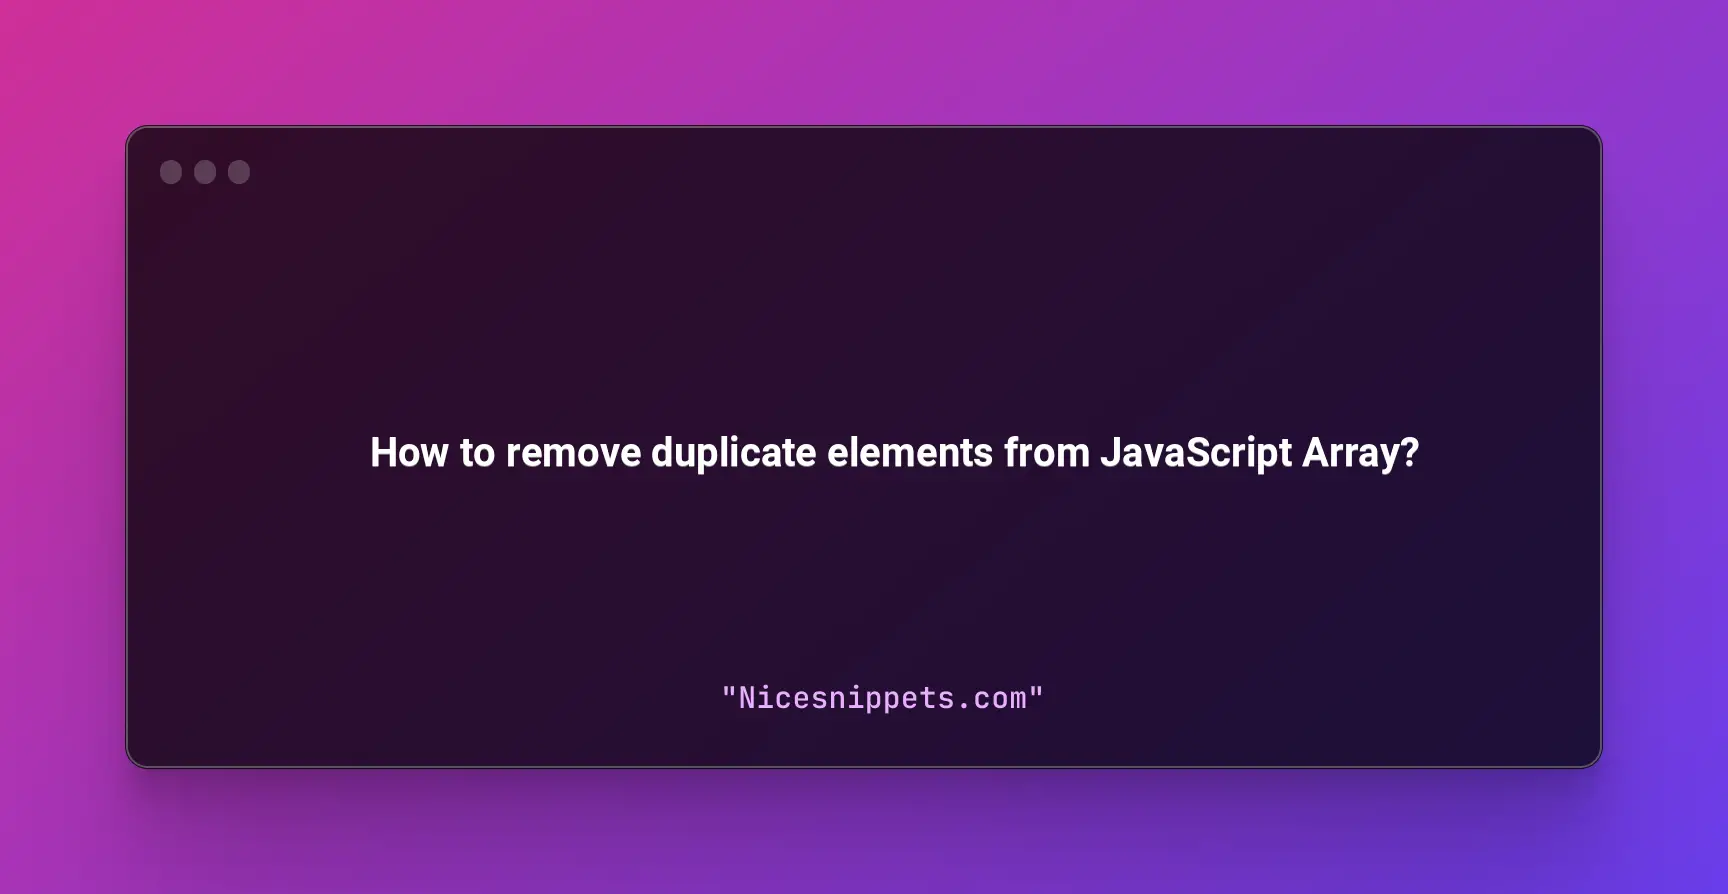 How to remove duplicate elements from JavaScript Array?